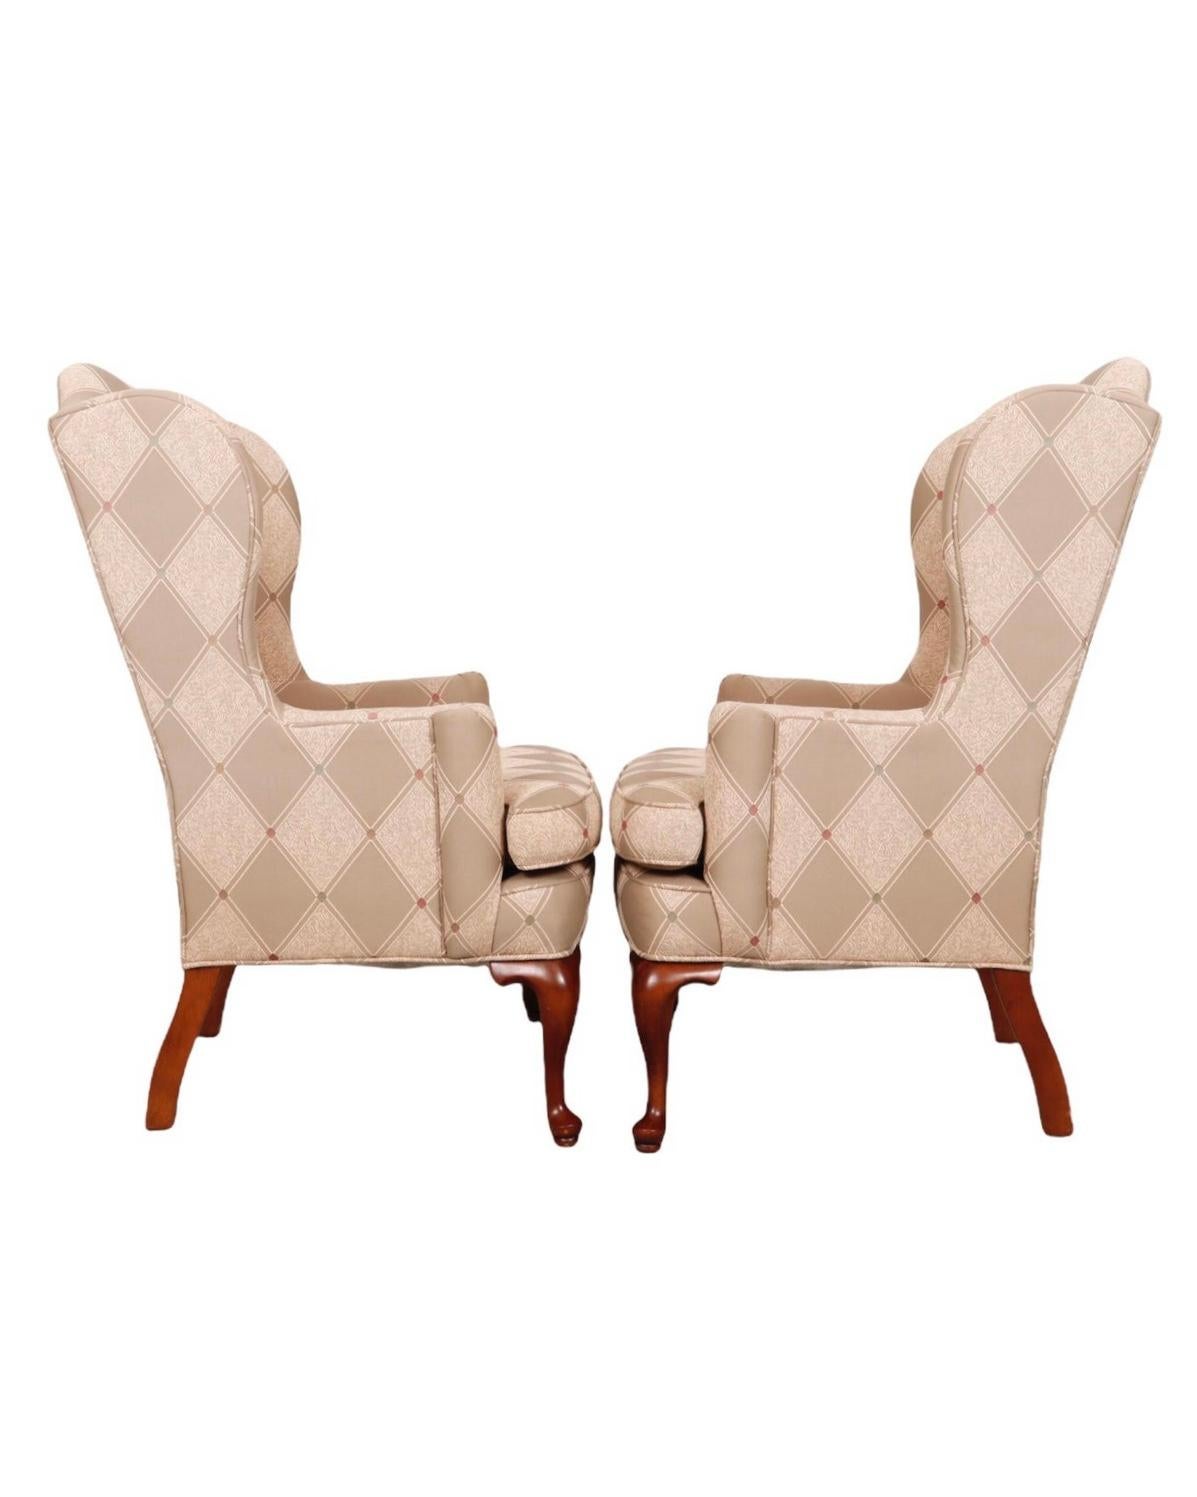 American Queen Anne Style Wingback Chairs - a Pair For Sale